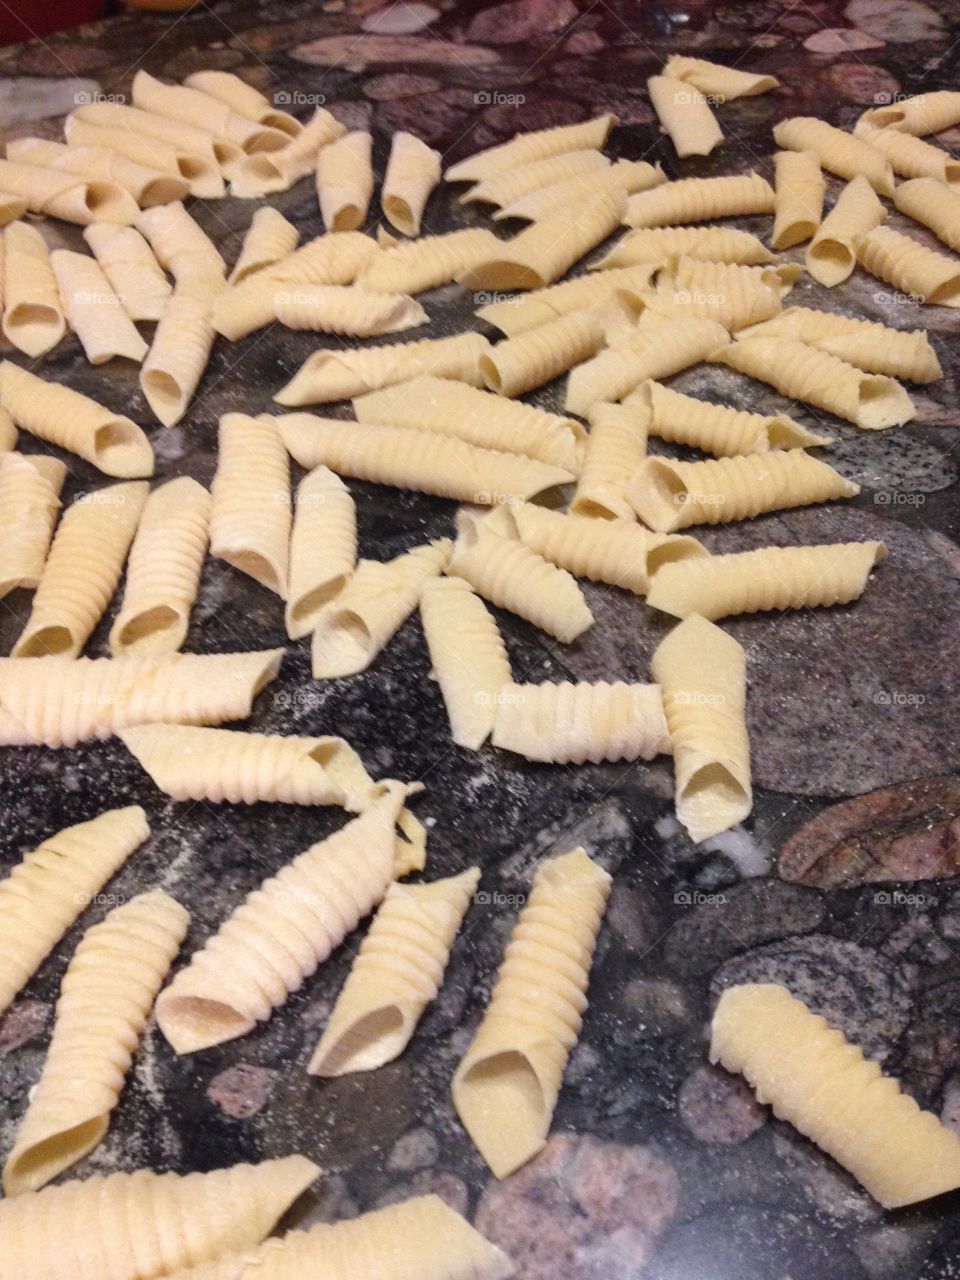 Homemade pasta drying. Garganelli noodles are the best. Unfiltered/edited picture. 